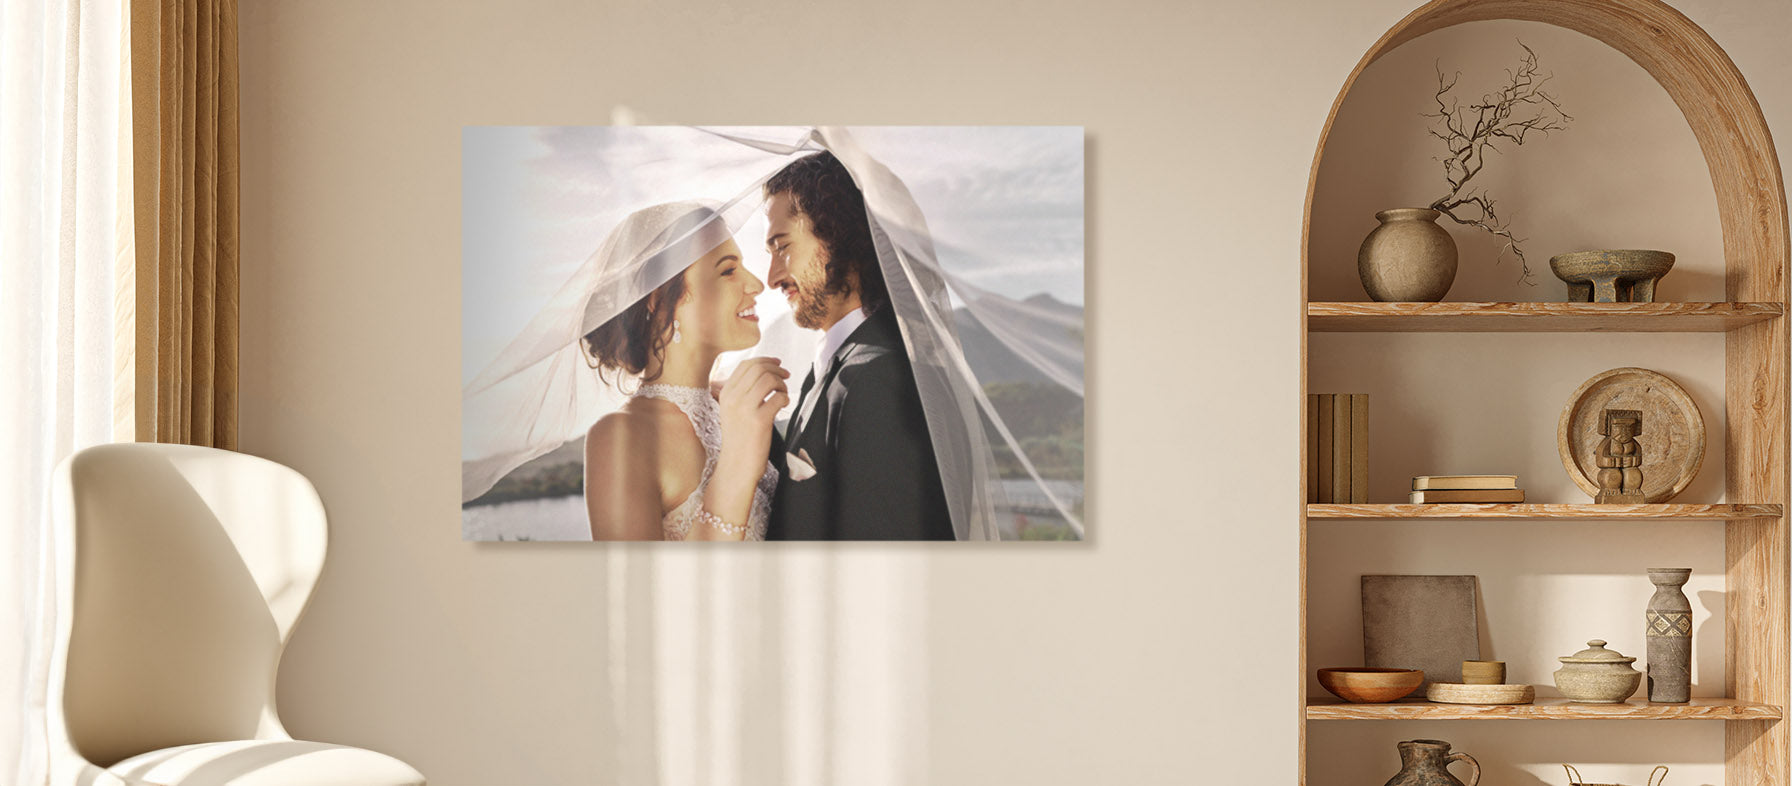 Acrylic photo print of a husband and wife in their wedding portrait hangs on the wall.